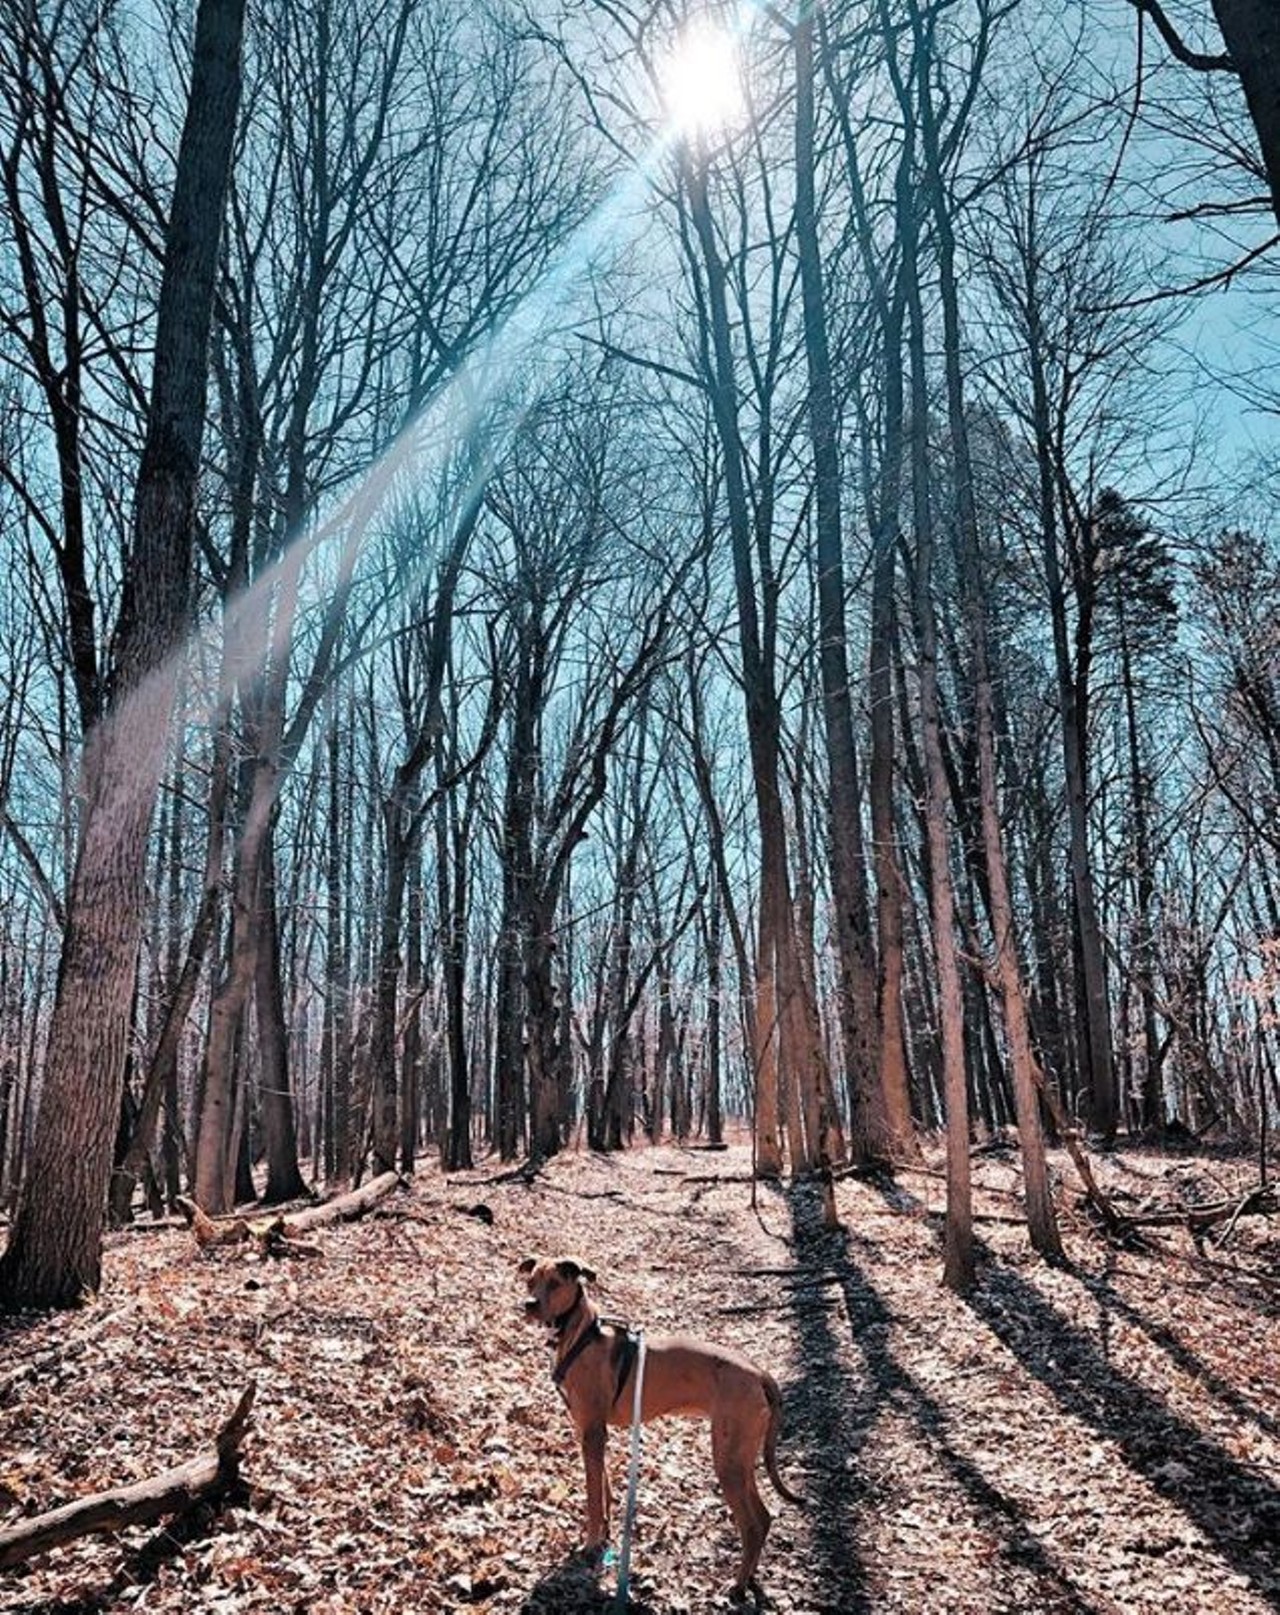 Bird Hills Trail
Ann Arbor
Ann Arbor's largest park and maybe the most densely forested. It's a hilly trail with plenty of wonderful views, and a serene getaway from the city.
Photo via Instagram user @deanna_lynnn